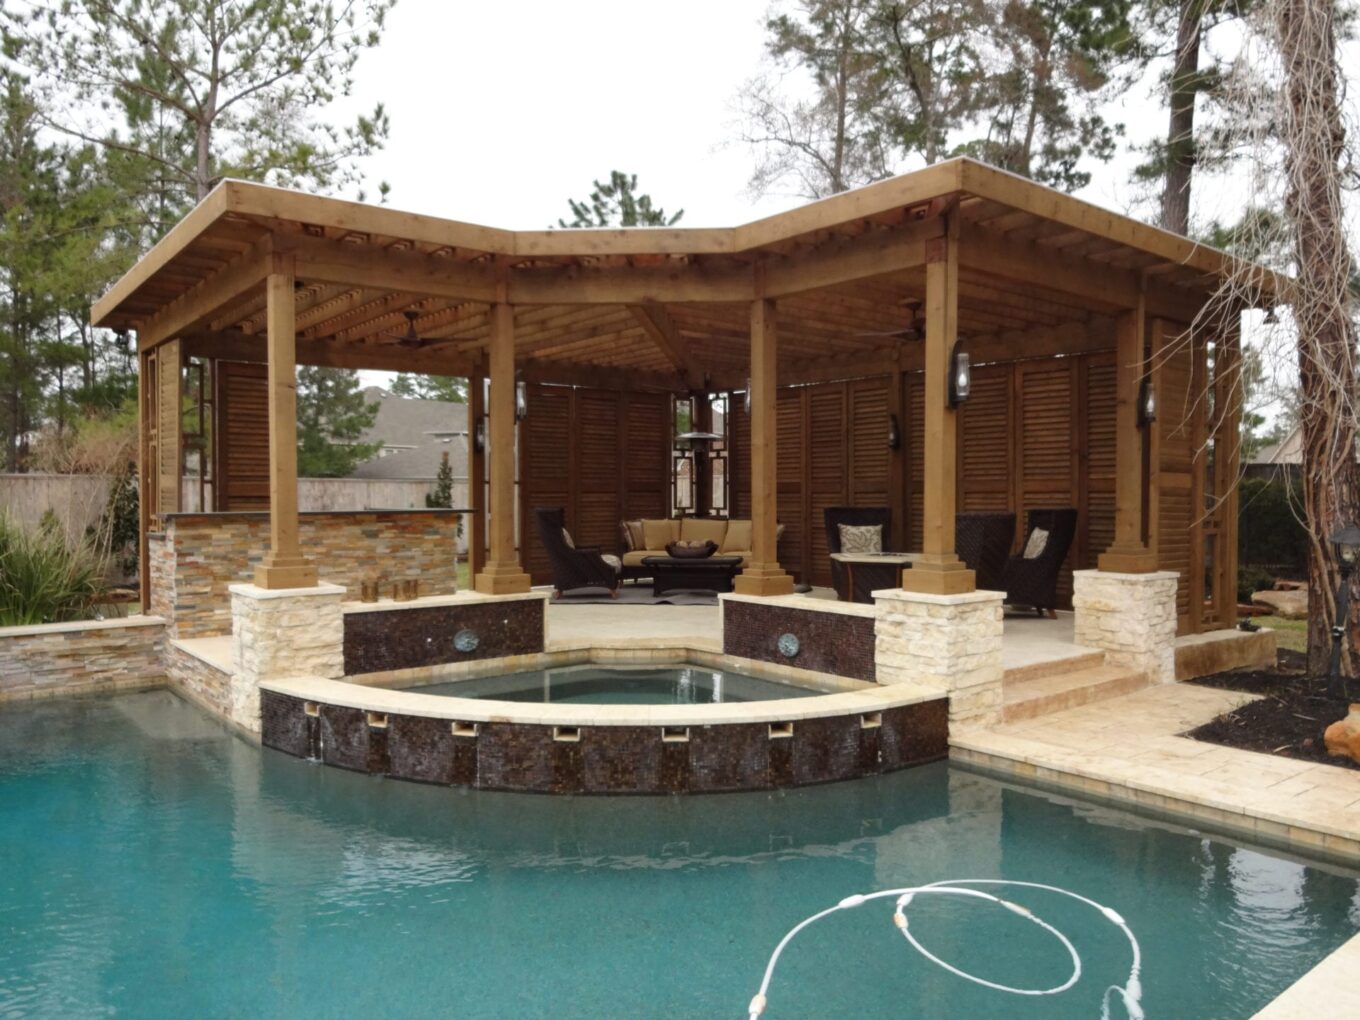 A pool with a gazebo and a hot tub in it.